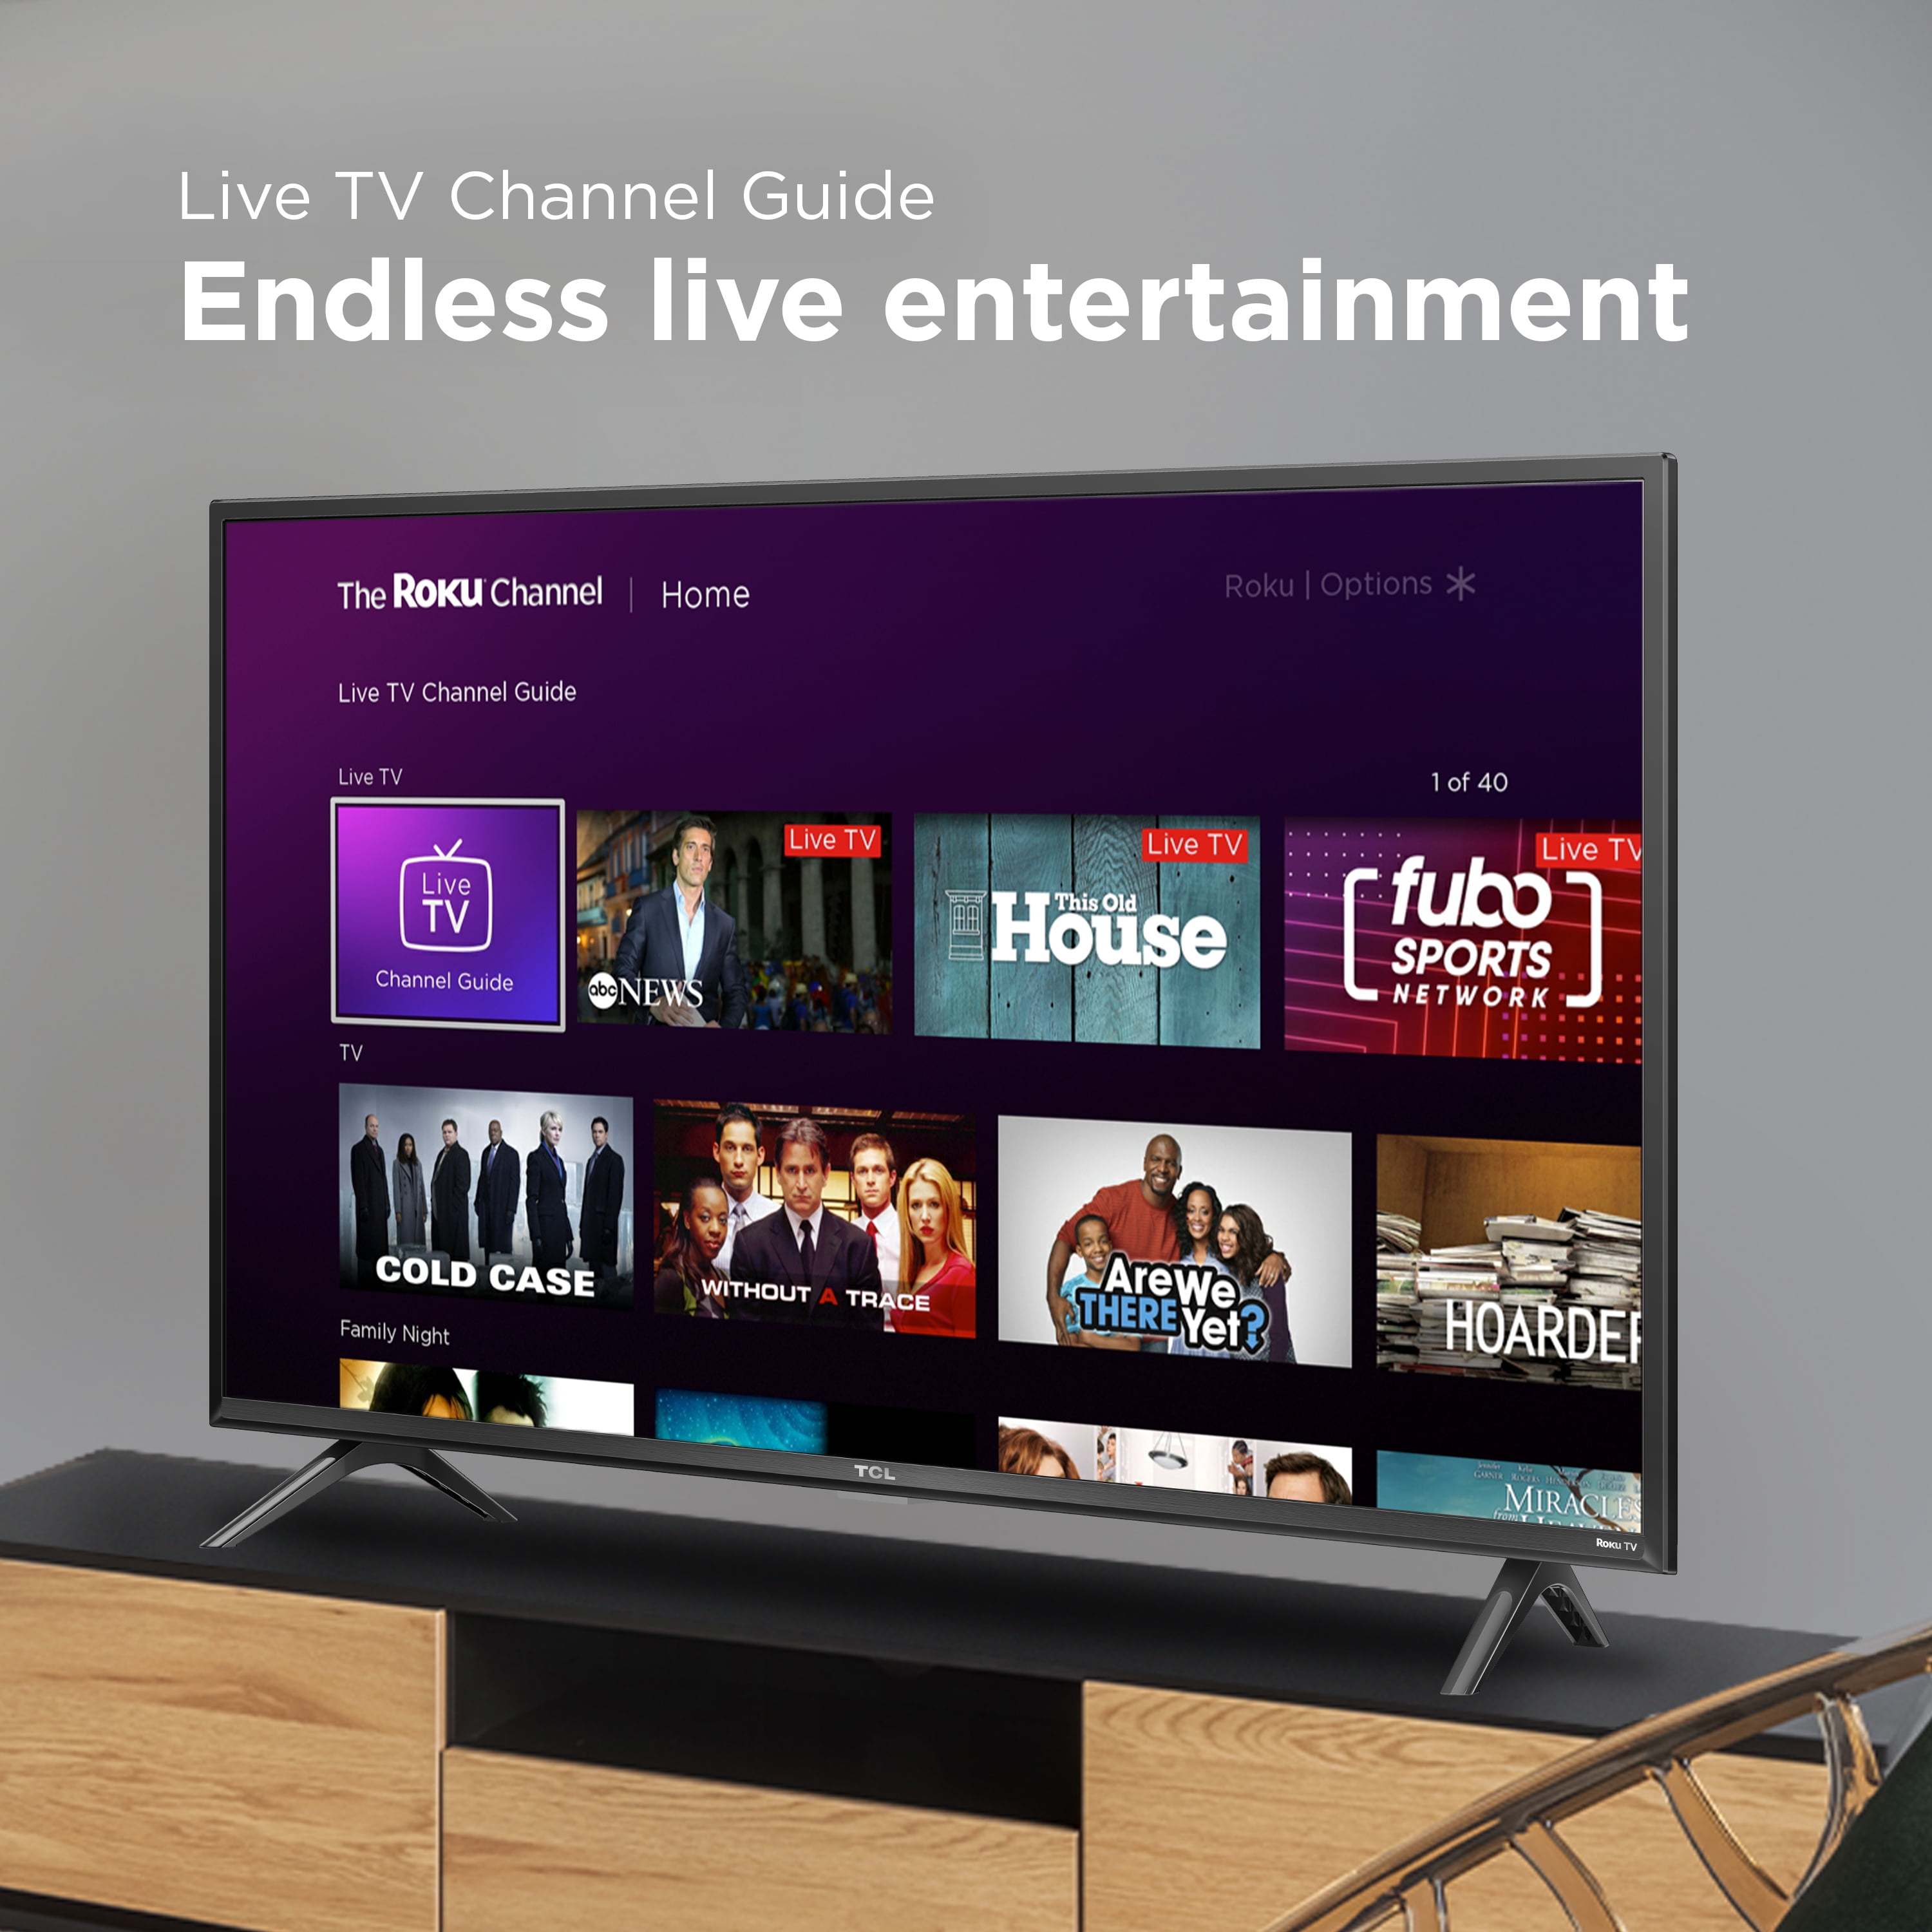 How To Get Into The  Prime Early Access Sale For Free - TV Guide